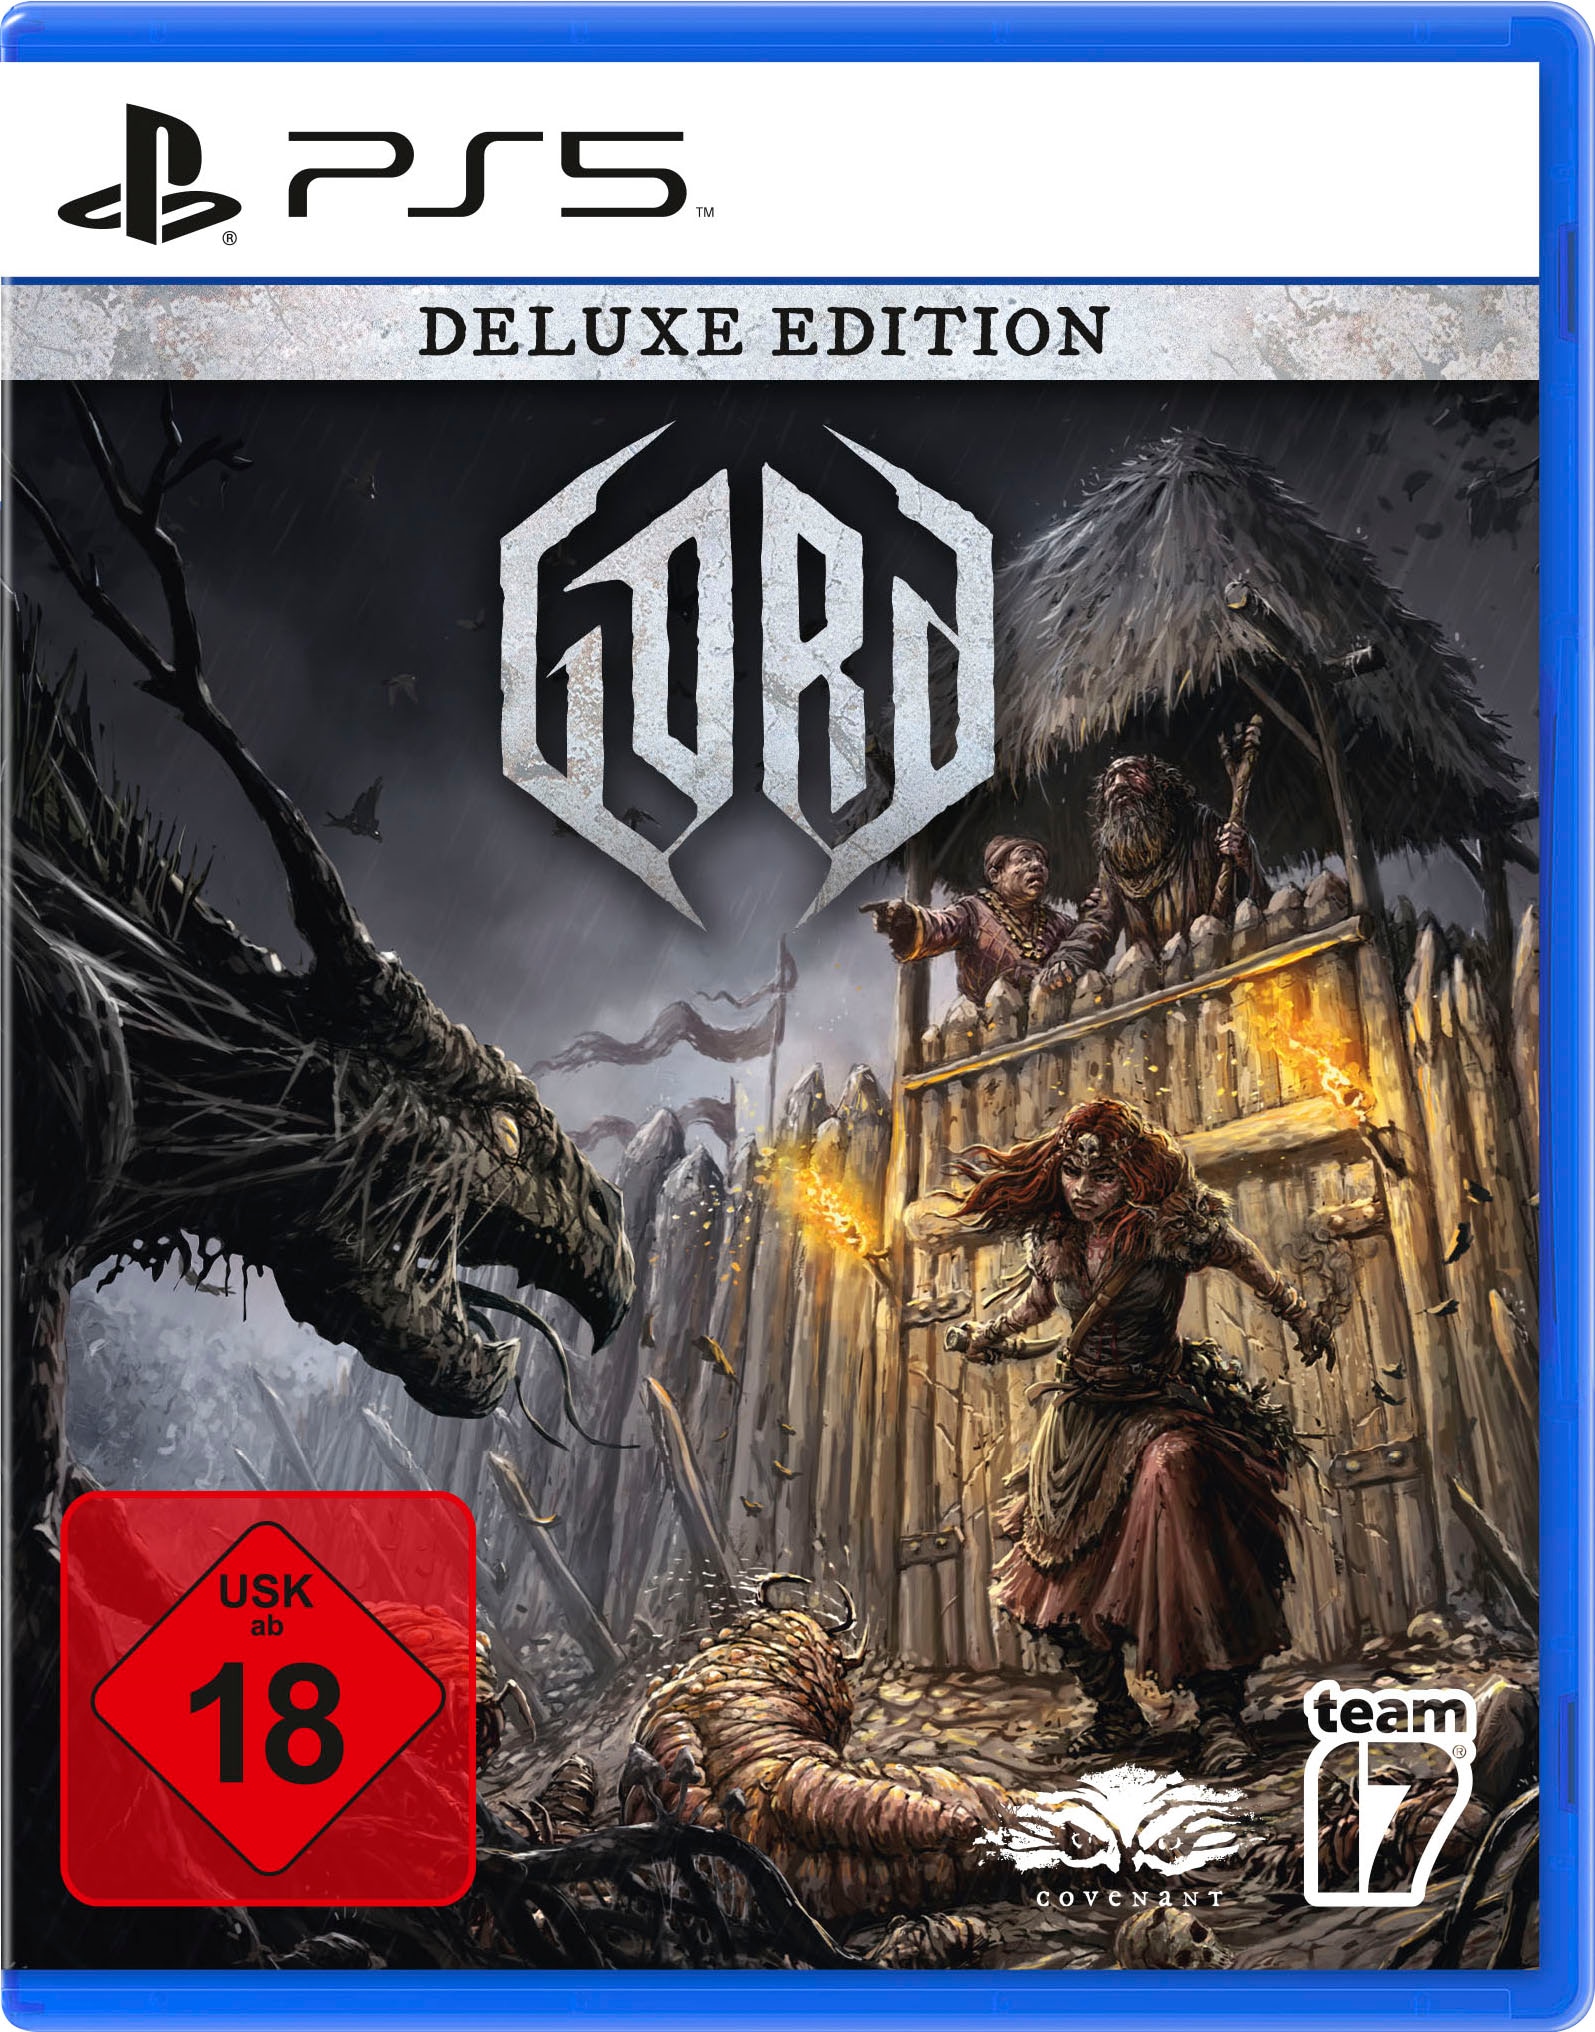  Spielesoftware »Gord Deluxe Edition« P...